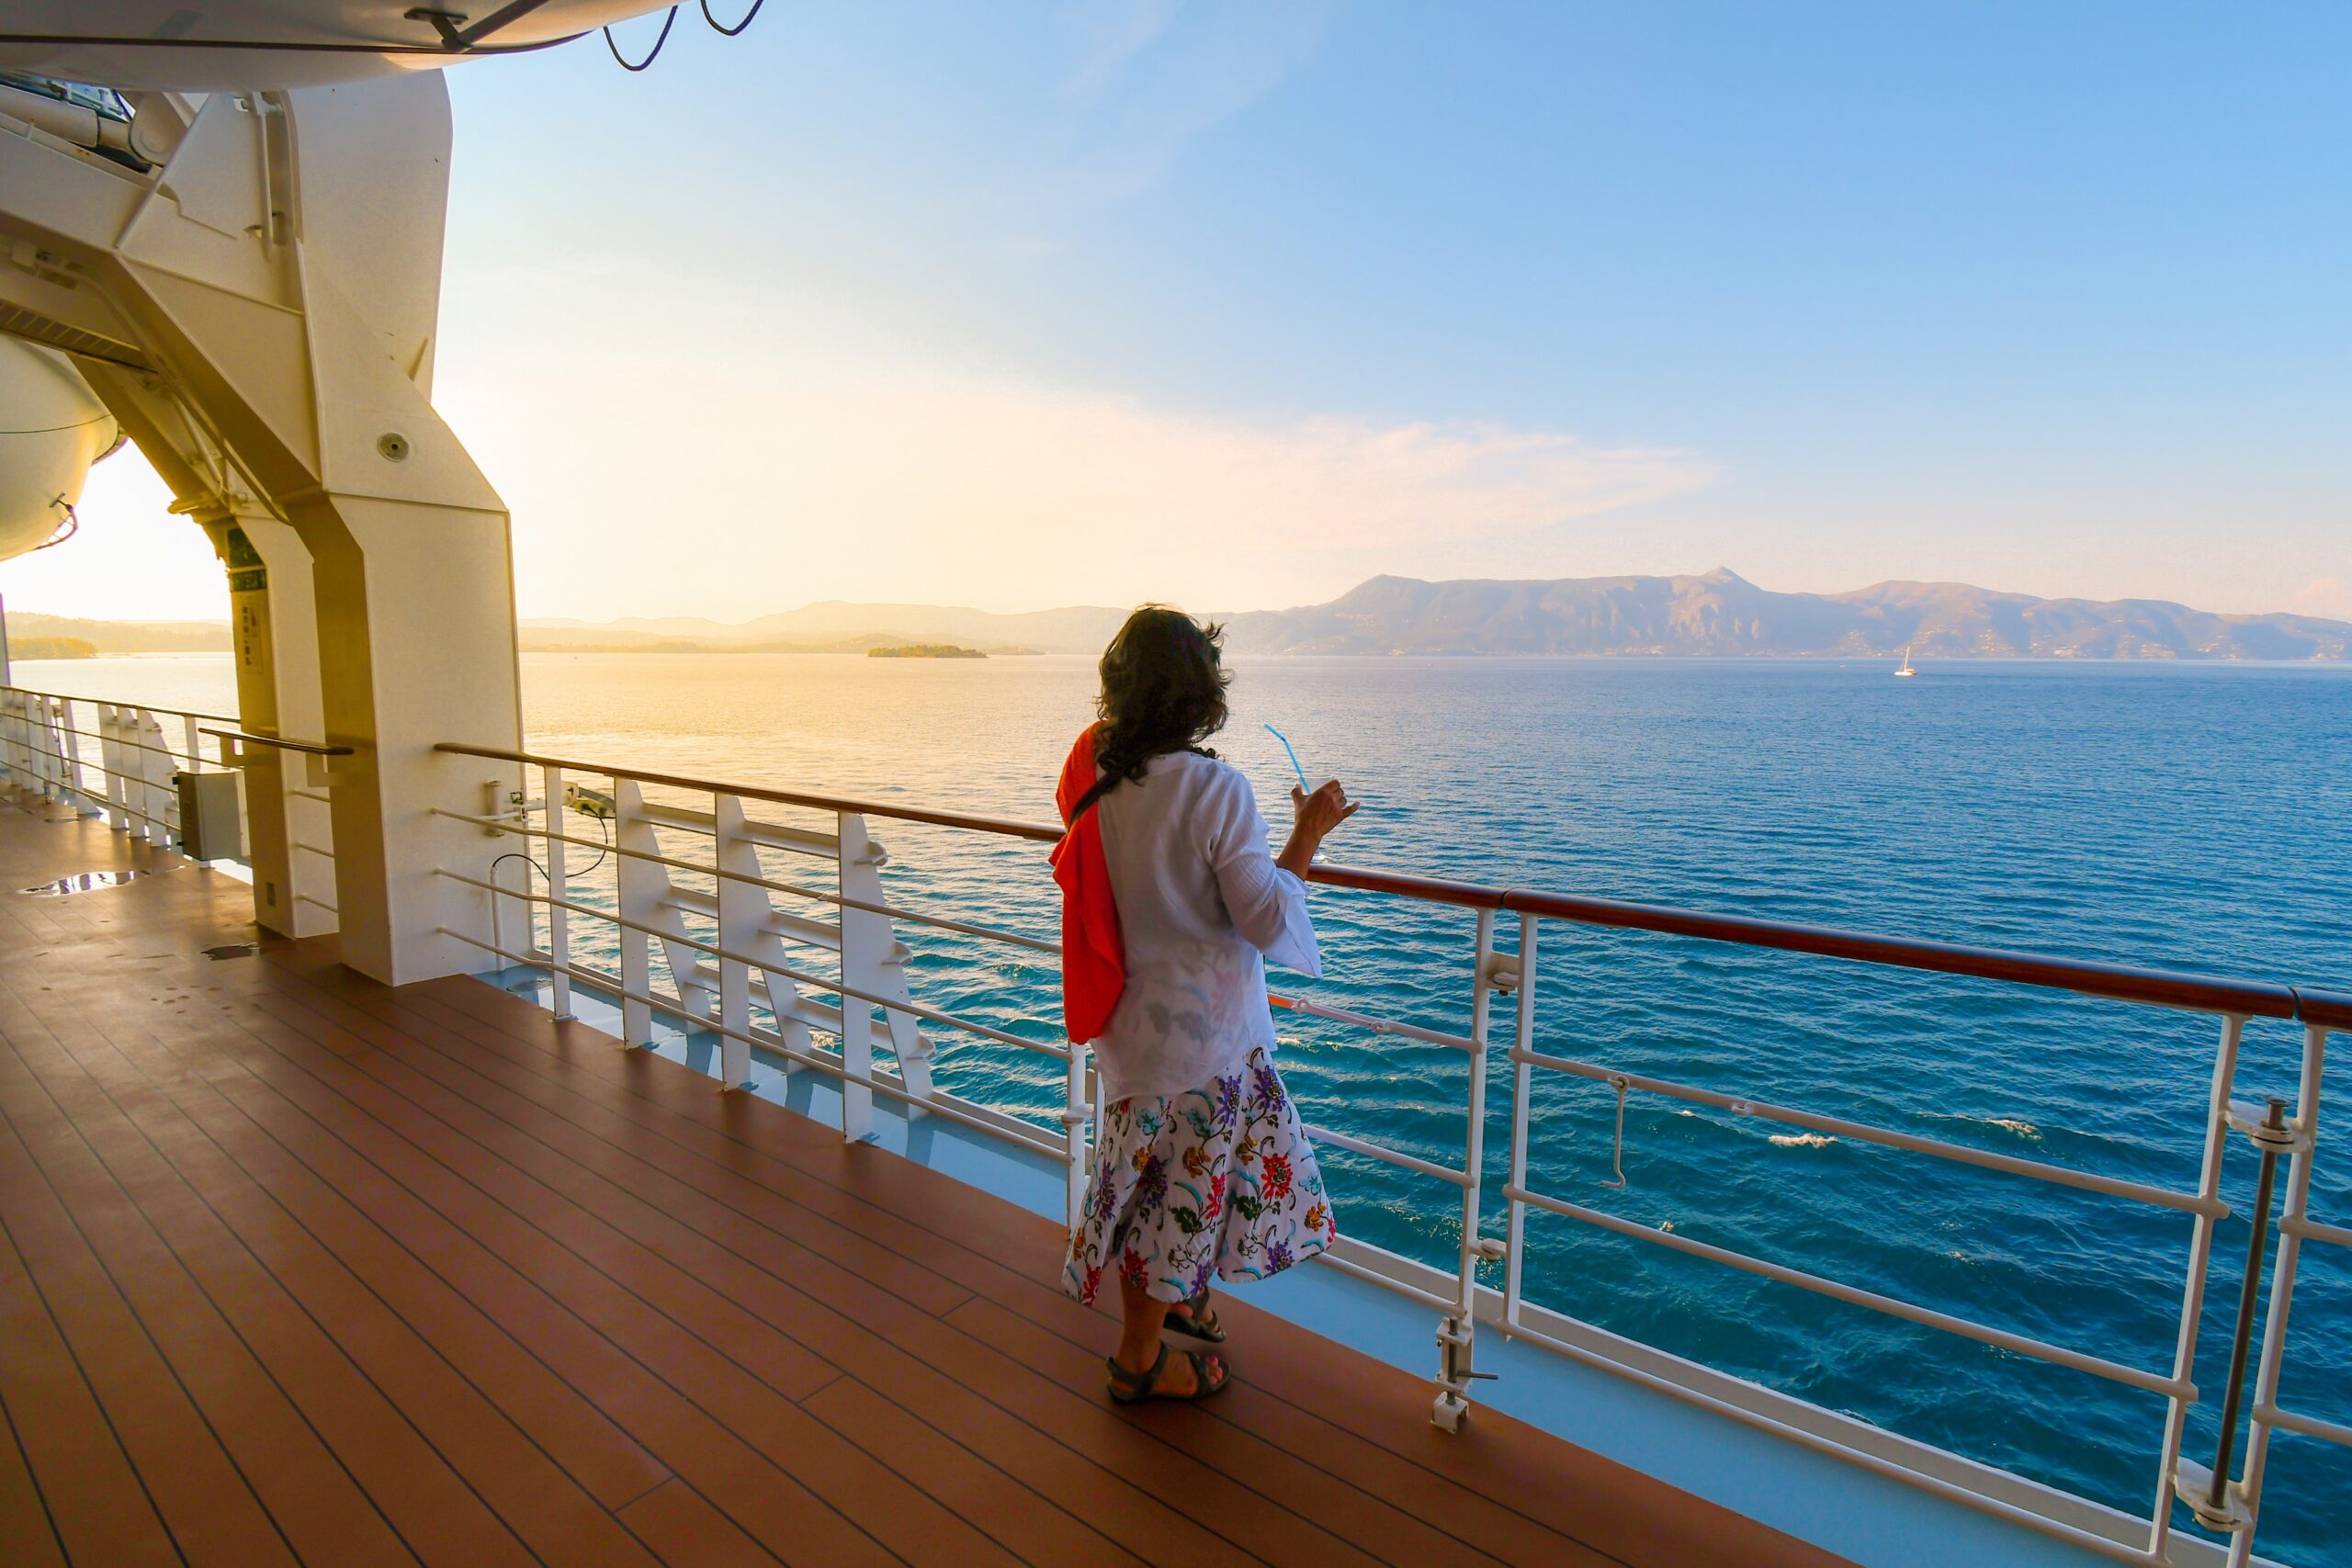 Can I Travel Alone On A Cruise?